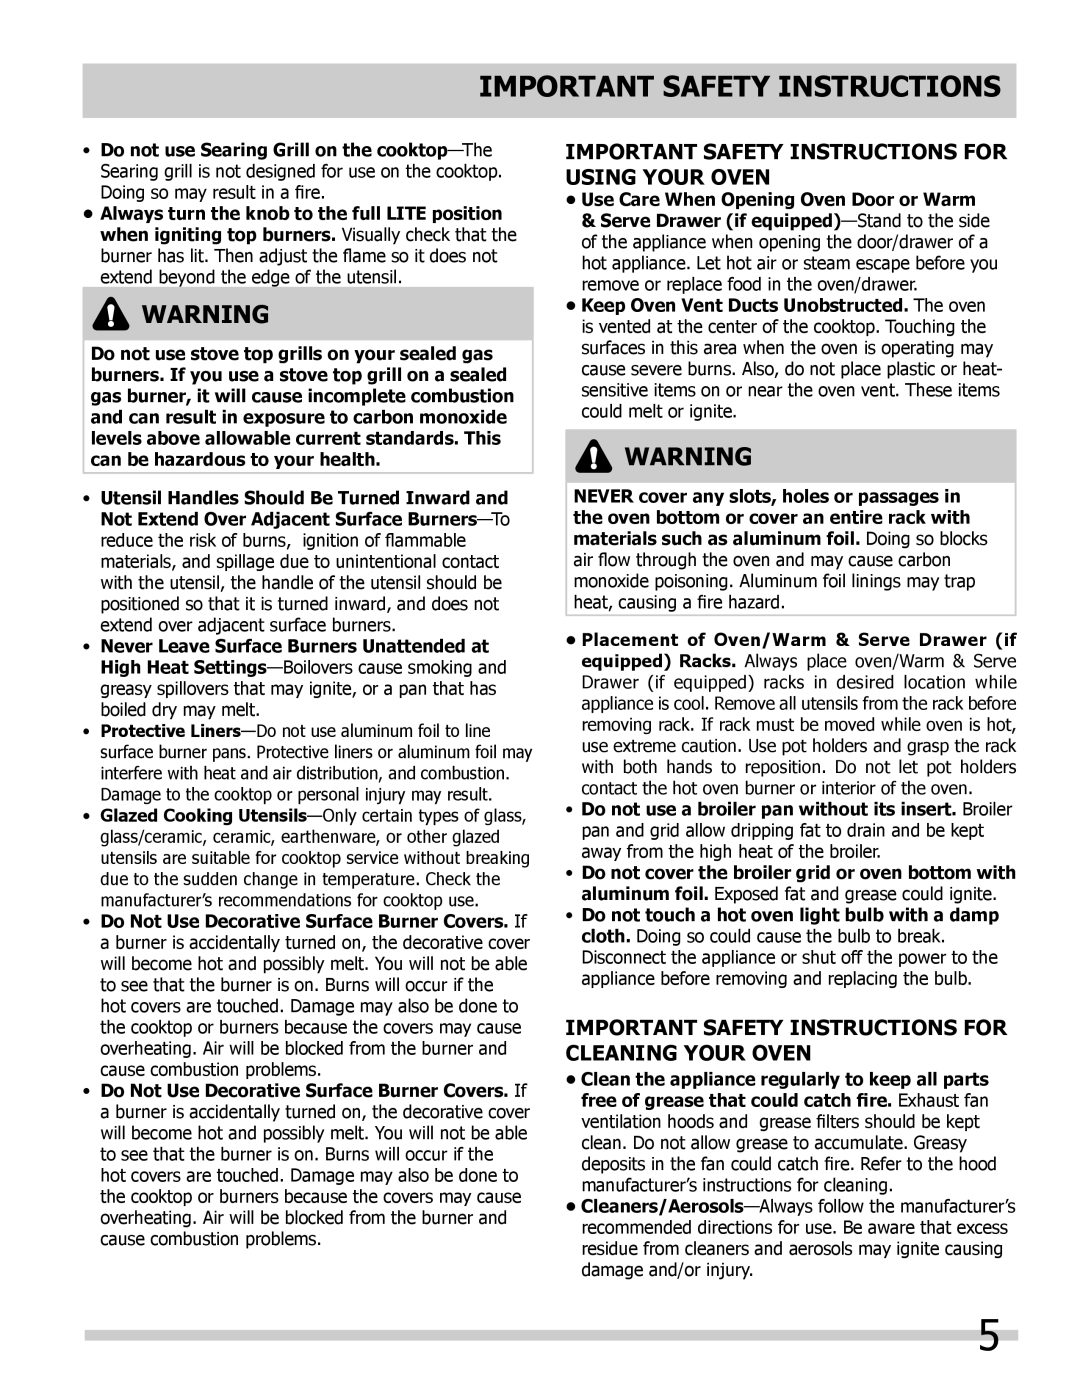 Frigidaire 318205852 manual Important Safety Instructions For Using Your Oven, Never Leave Surface Burners Unattended at 